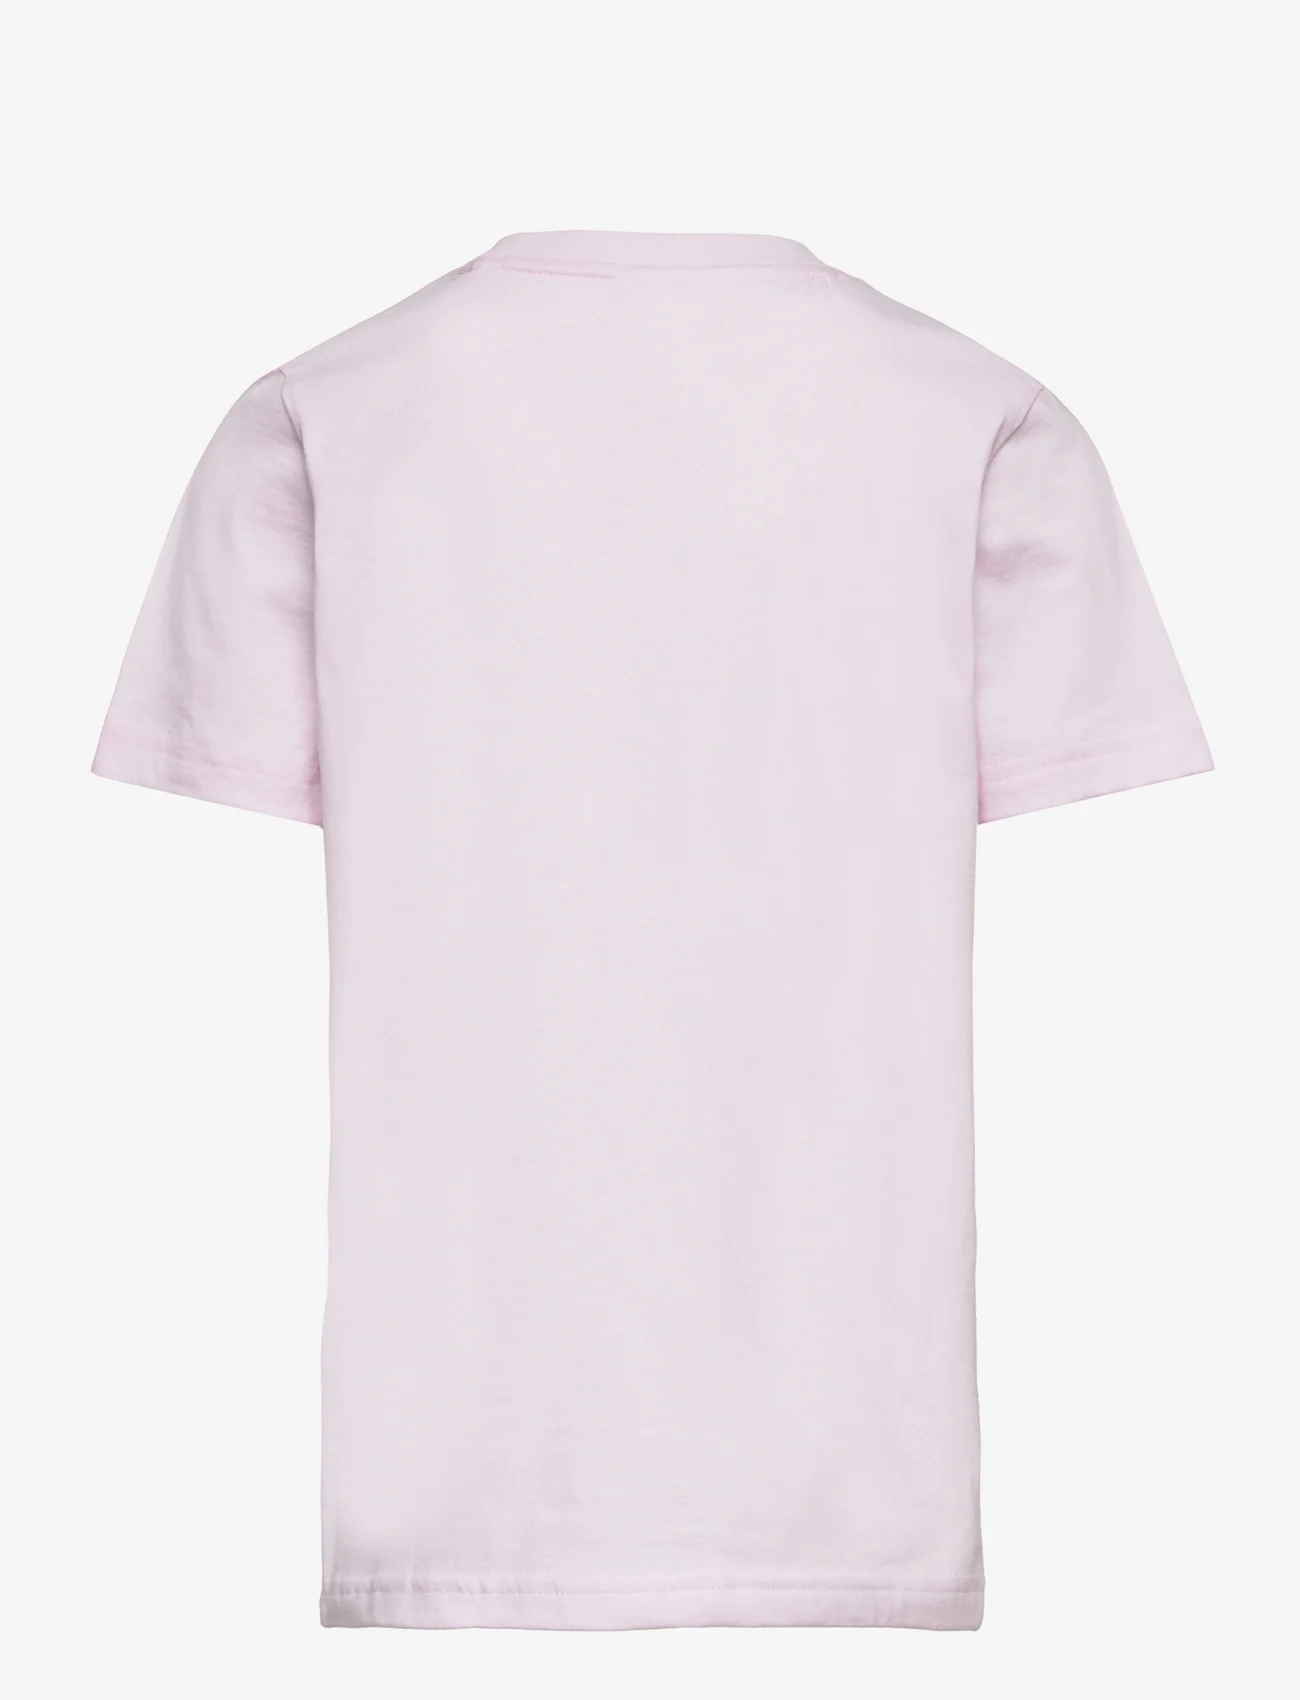 adidas Performance - LK BL CO TEE - short-sleeved t-shirts - clpink/white - 1